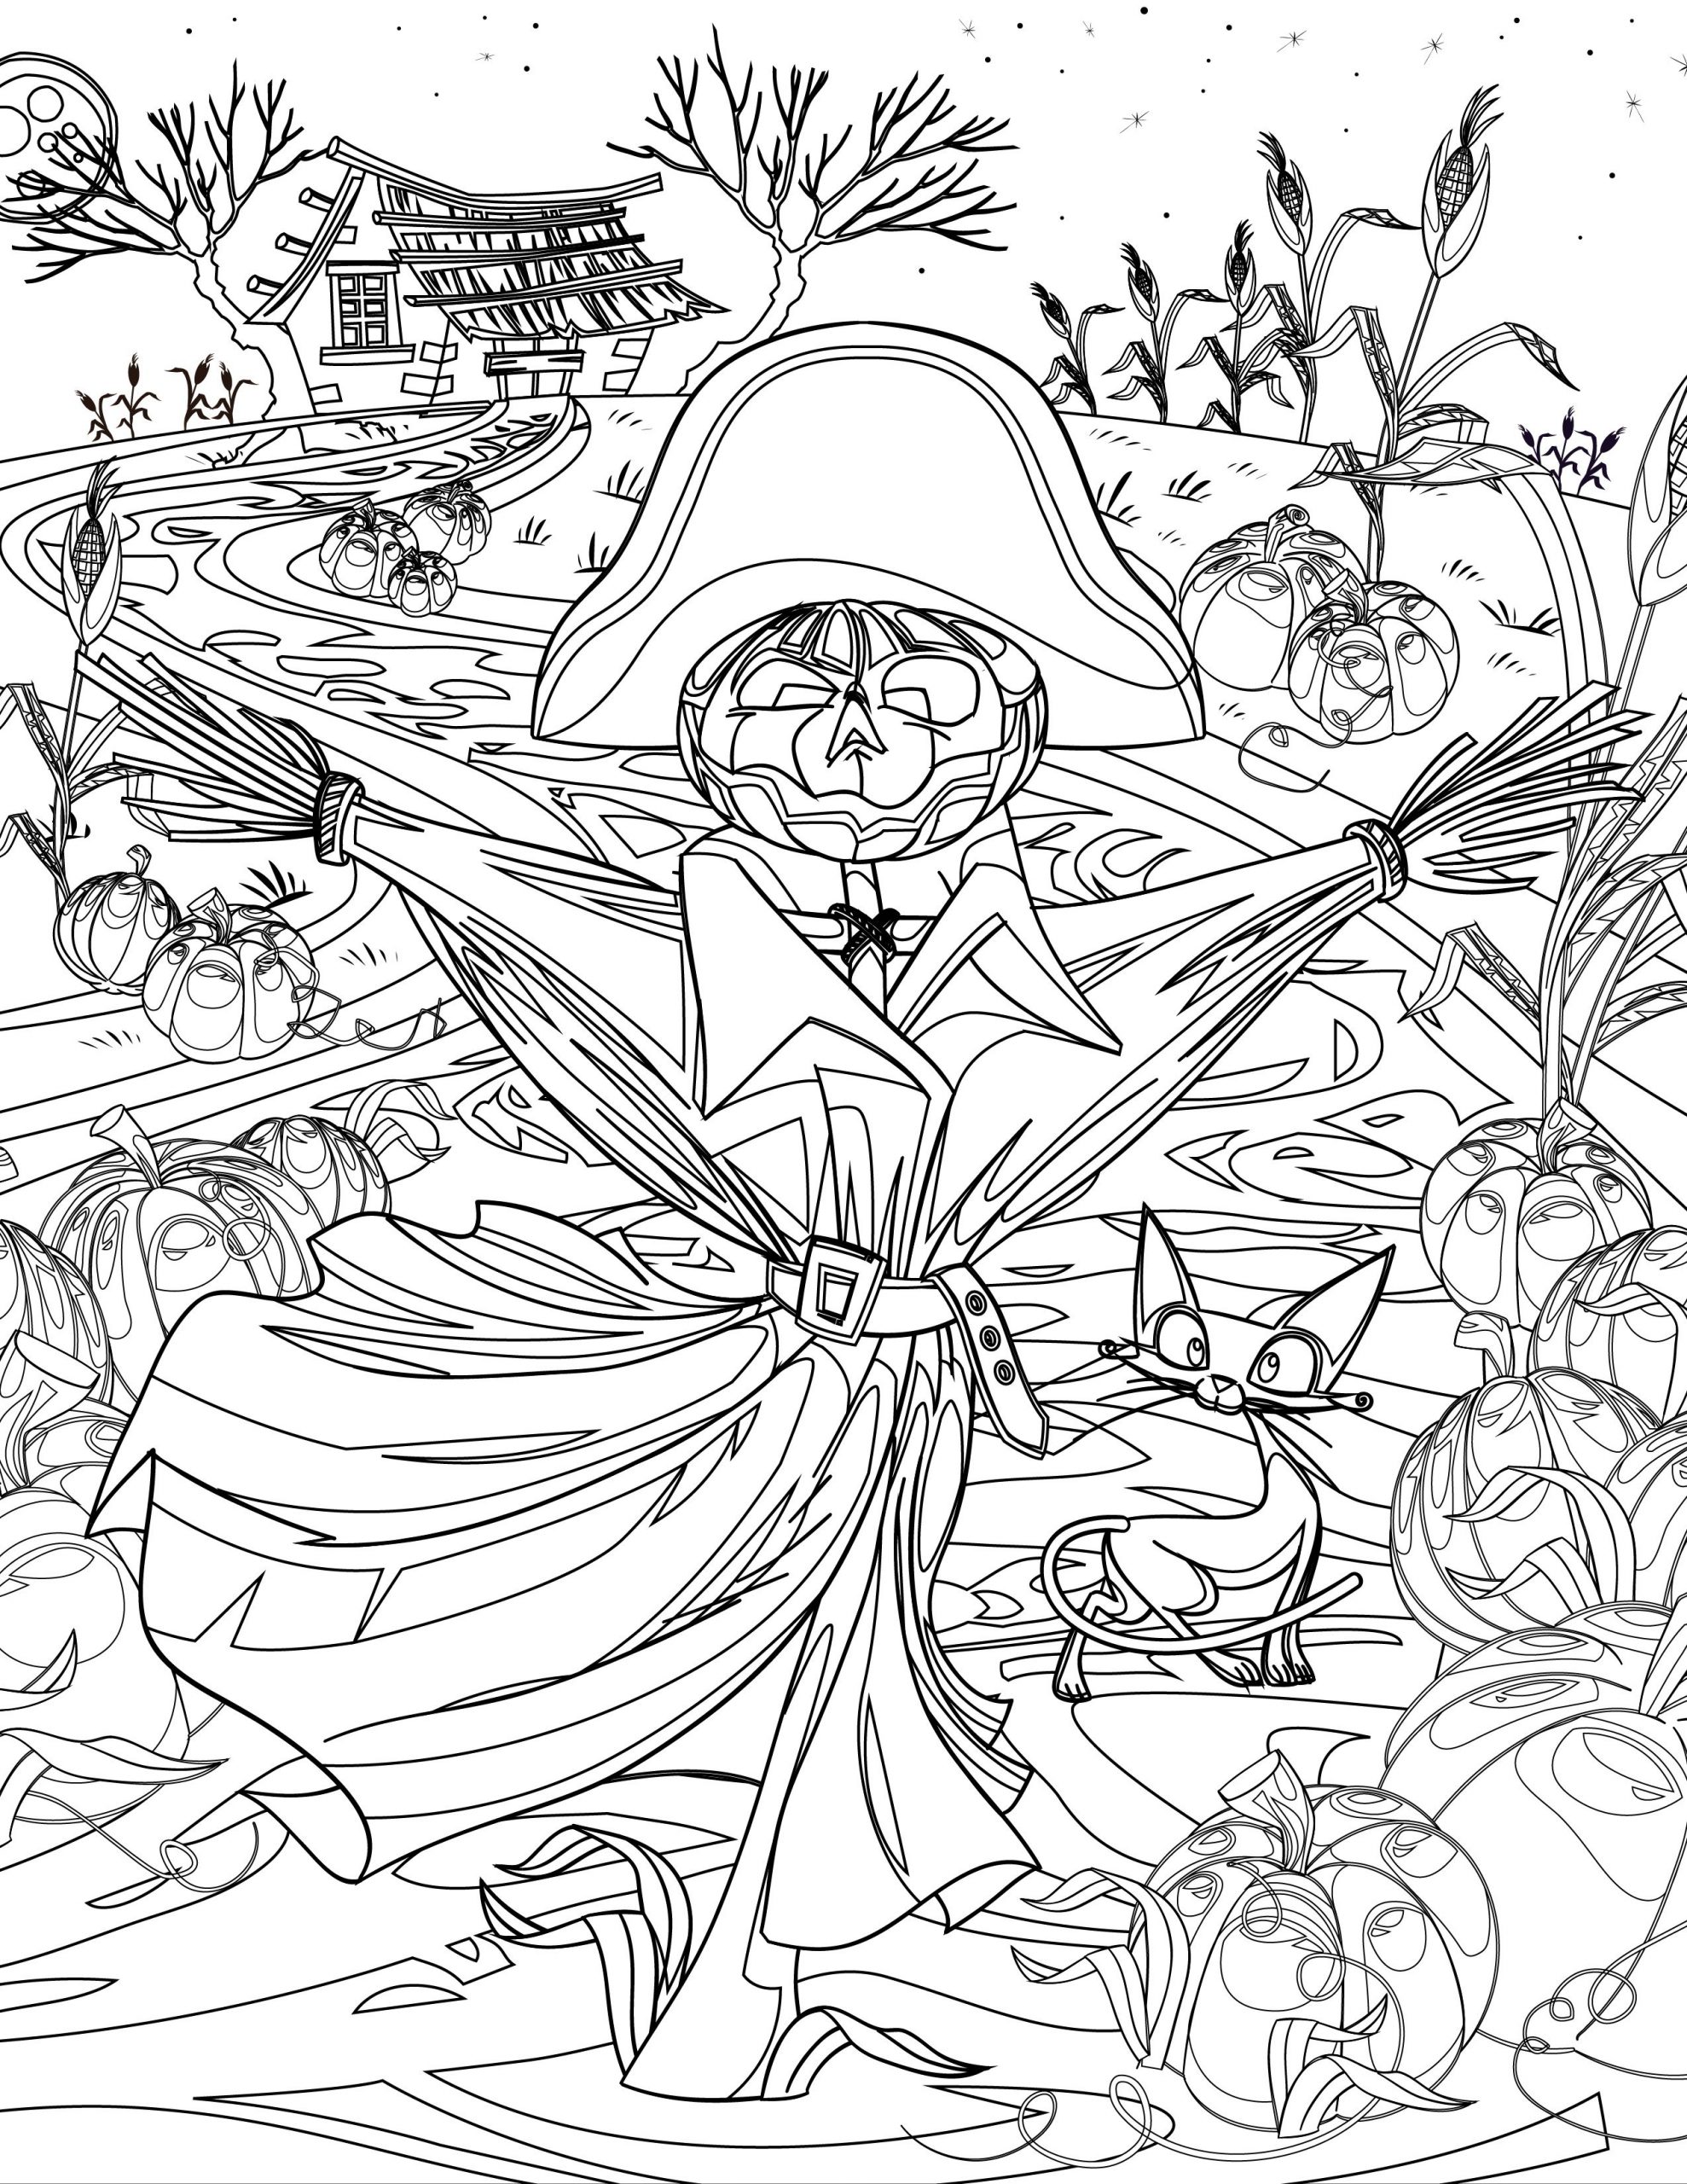 Pin On Coloriages D&amp;#039;Halloween Coloring Pages tout Coloriage D Haloween 